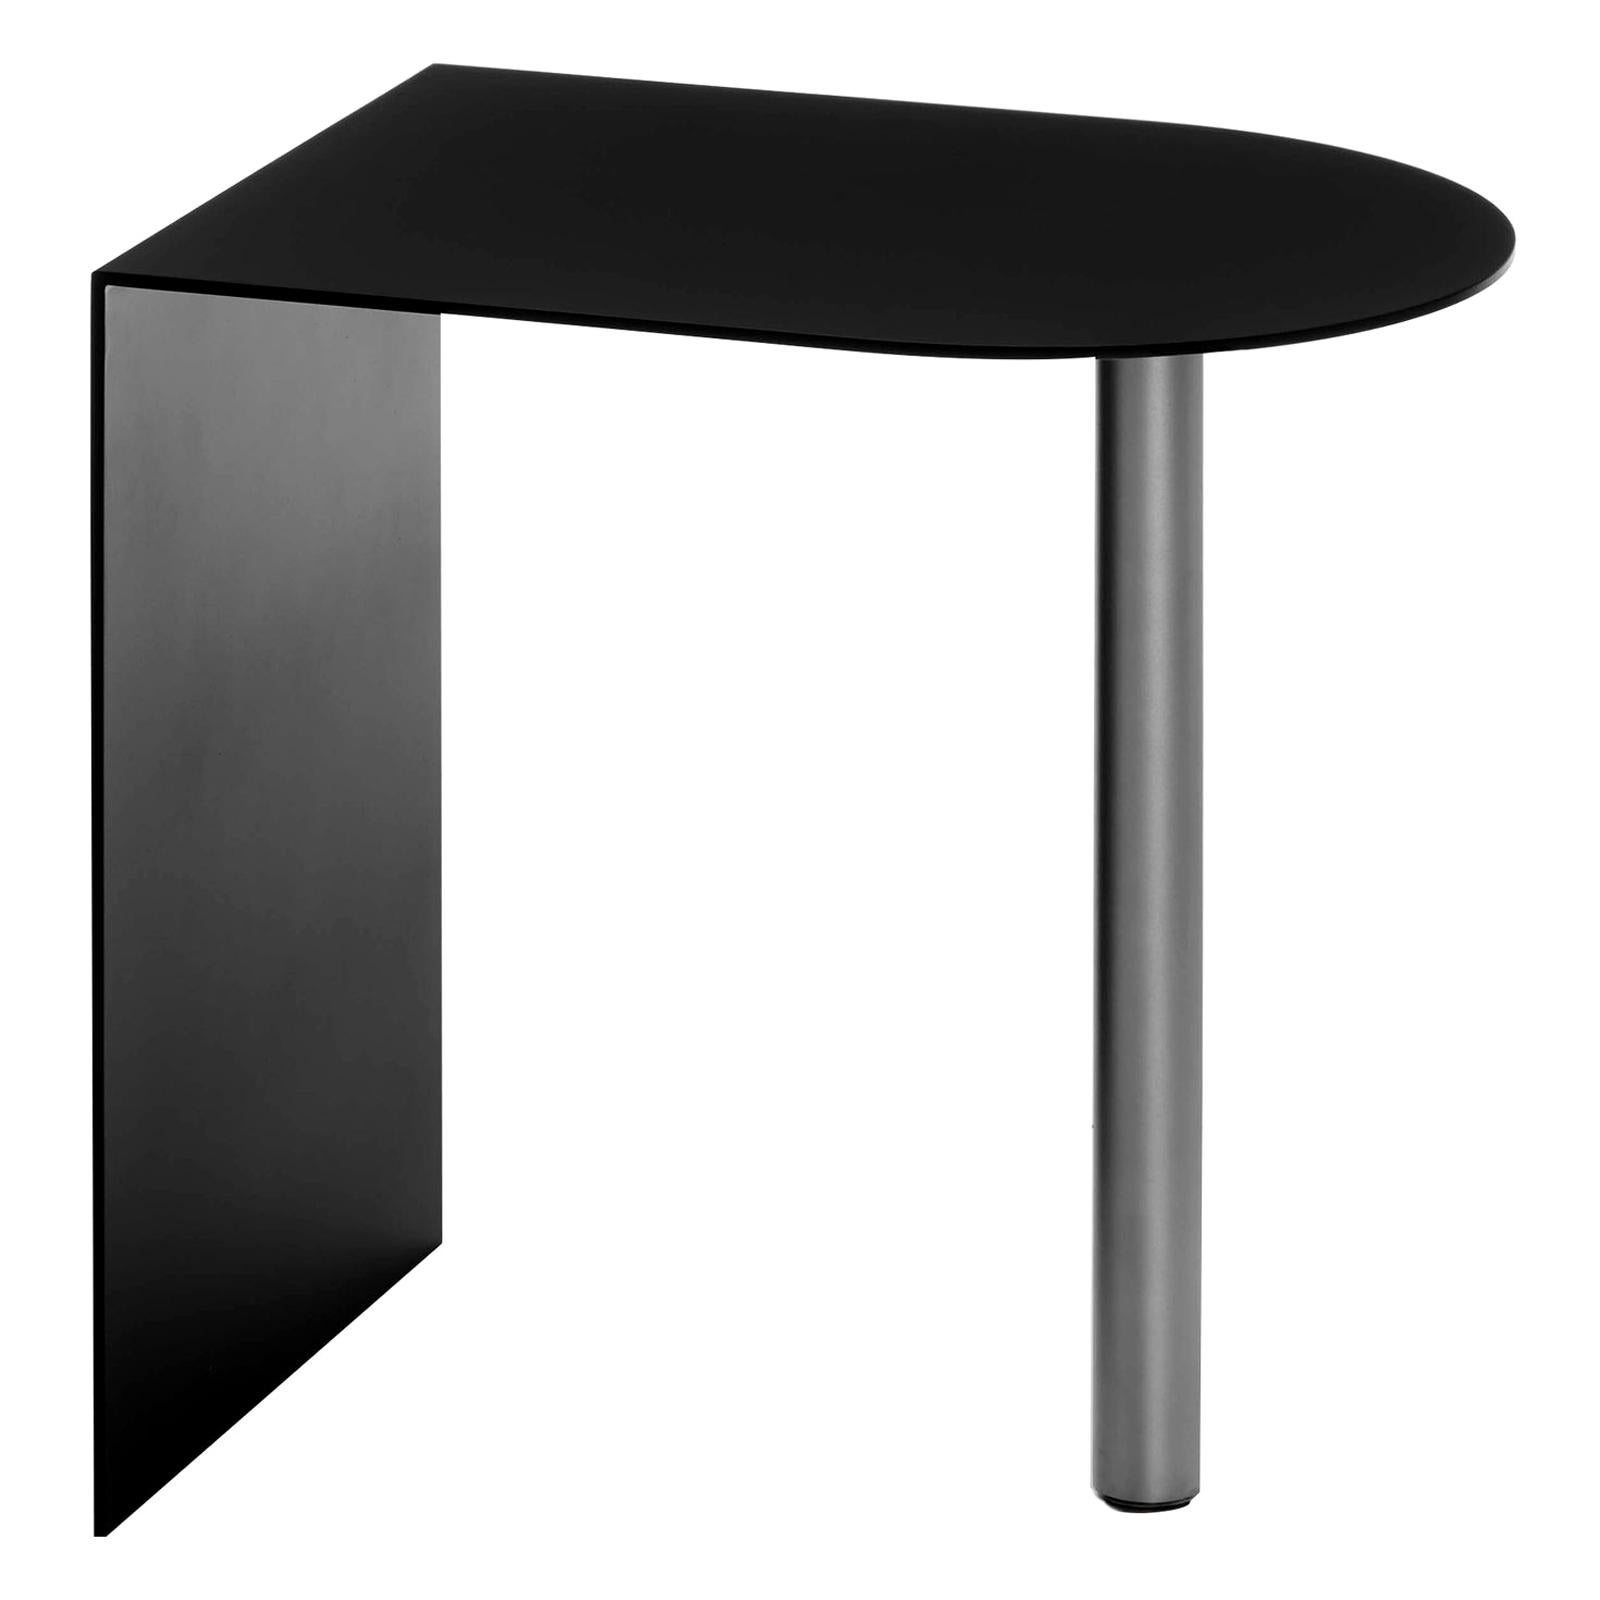 FUCINA "PIATTO" by Sam Hecht & Kim Collin, Low Round Side Table Black Metal For Sale